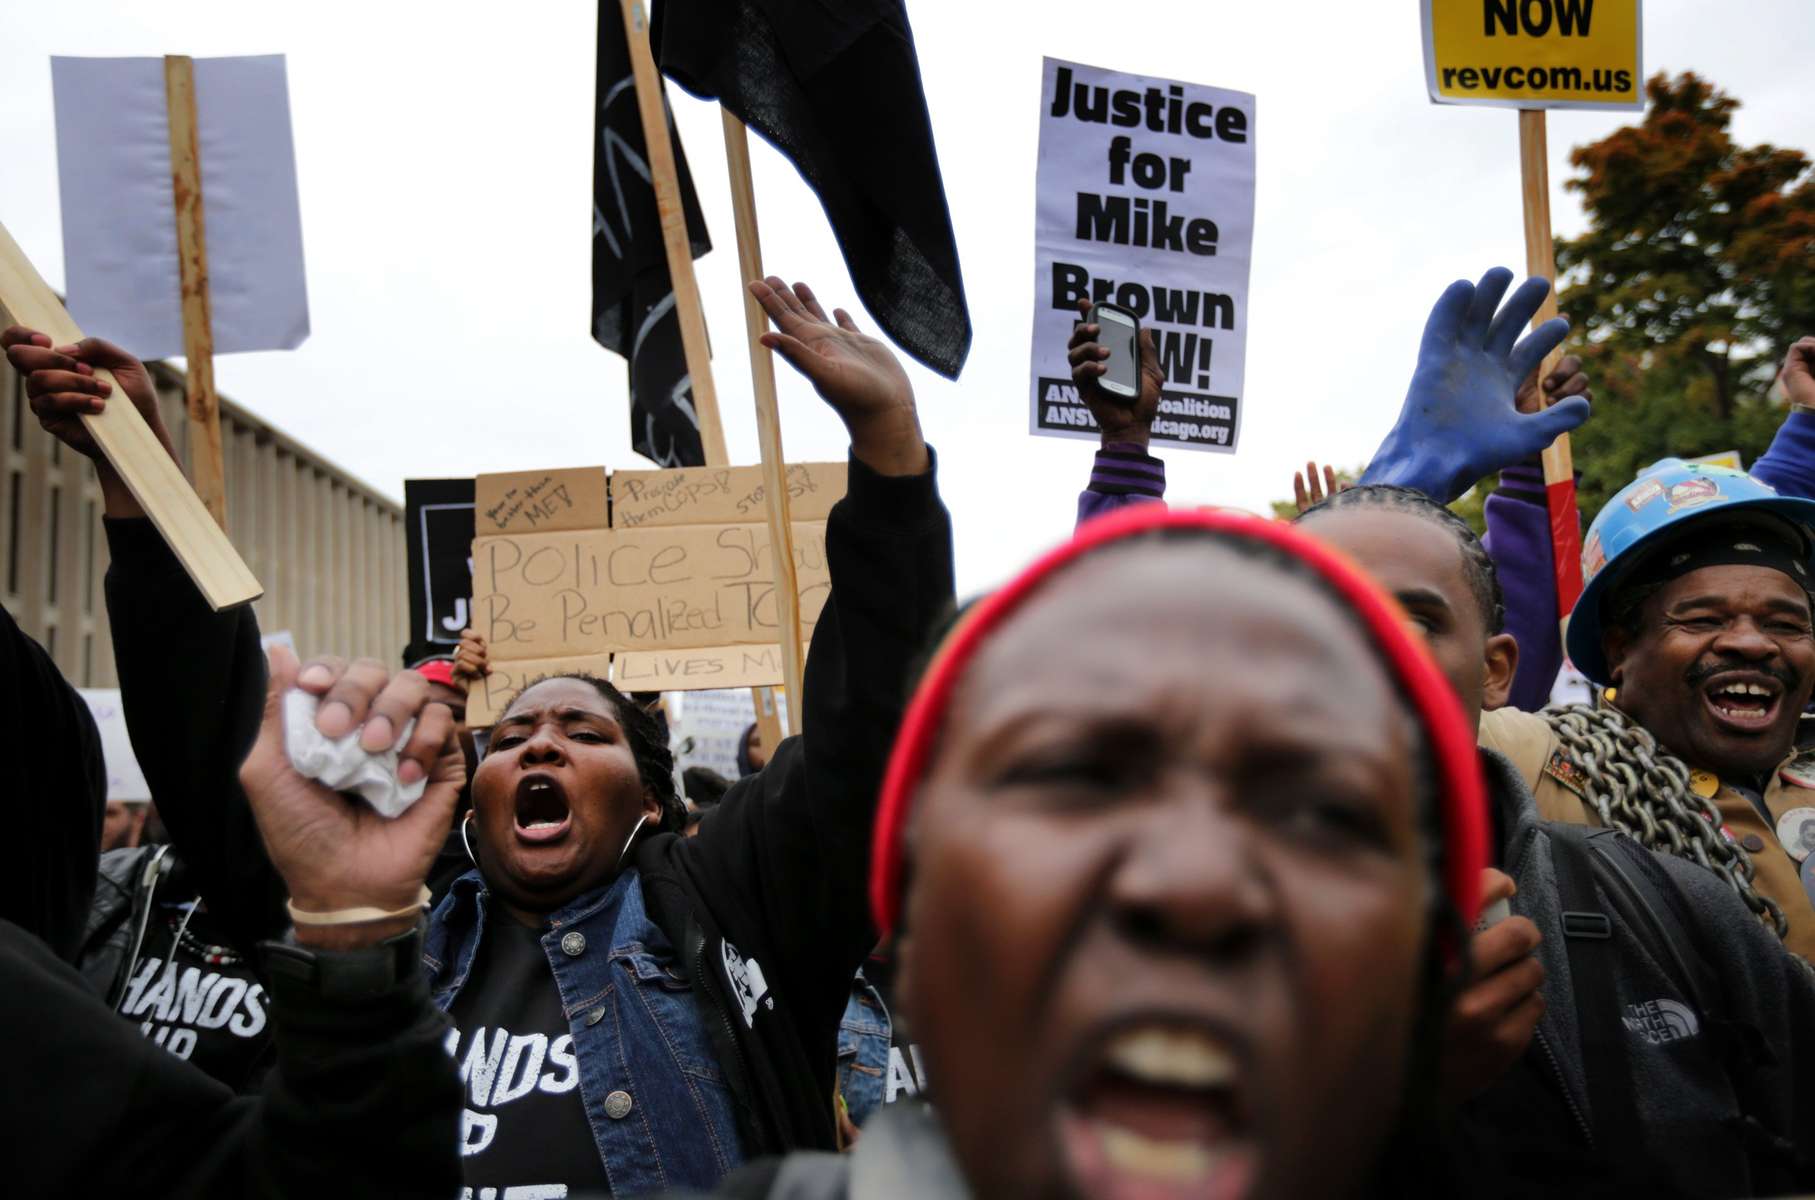 People chant before the start Ferguson October march in downtown St. Louis on Saturday, October, 11, 2014.  Thousands of people took part in the march down Market Street and rally in Kiener Plaza.